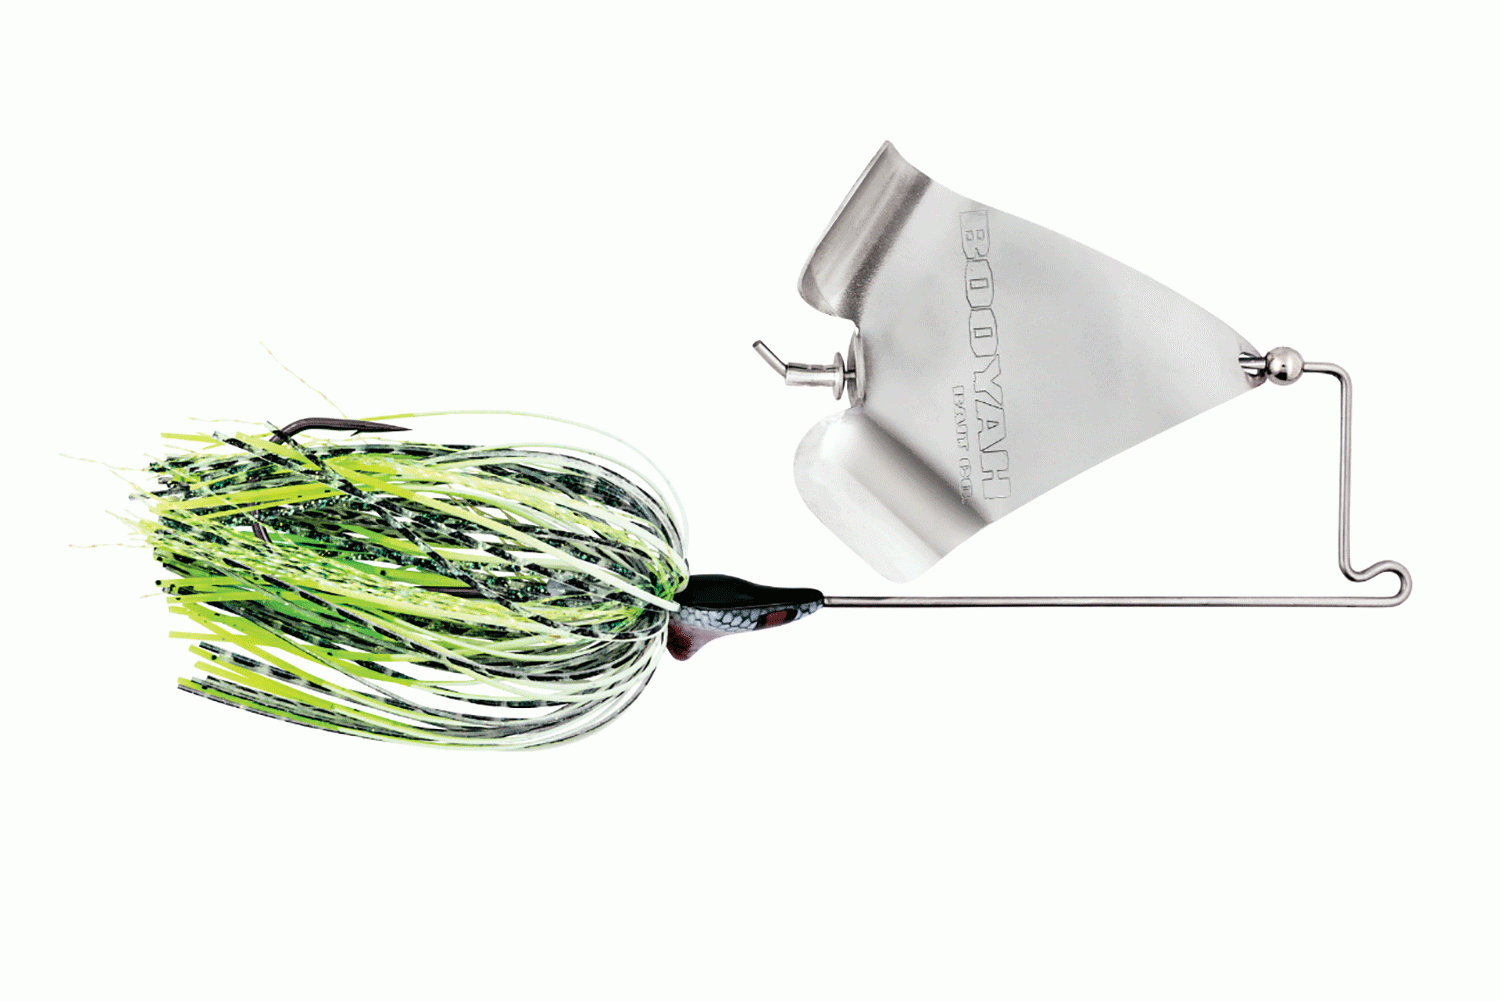 <p><b>Booyah Squelcher, $7.99</b></p> Perfection gets tossed around far too much in the fishing industry, but we believe that the new Booyah Squelcher is sitting atop a plateau in the buzz bait category. The Squelcher features components that provide an action most anglers spend hours tuning on their traditional buzzbaits to achieve. Components such as: Extra-large cupped blade that allows the bait to be fished extra slow, nested rivet for optimum screech, keeled head, and an extra sharp hook with wire plastic keeper to eliminate the need for glue. Painstaking R&D took place to fine tune all of these features present in the Squelcher, and the result is a buzz bait that any hardcore bass angler will be itching to reel across a slick calm surface.<br> <a href=